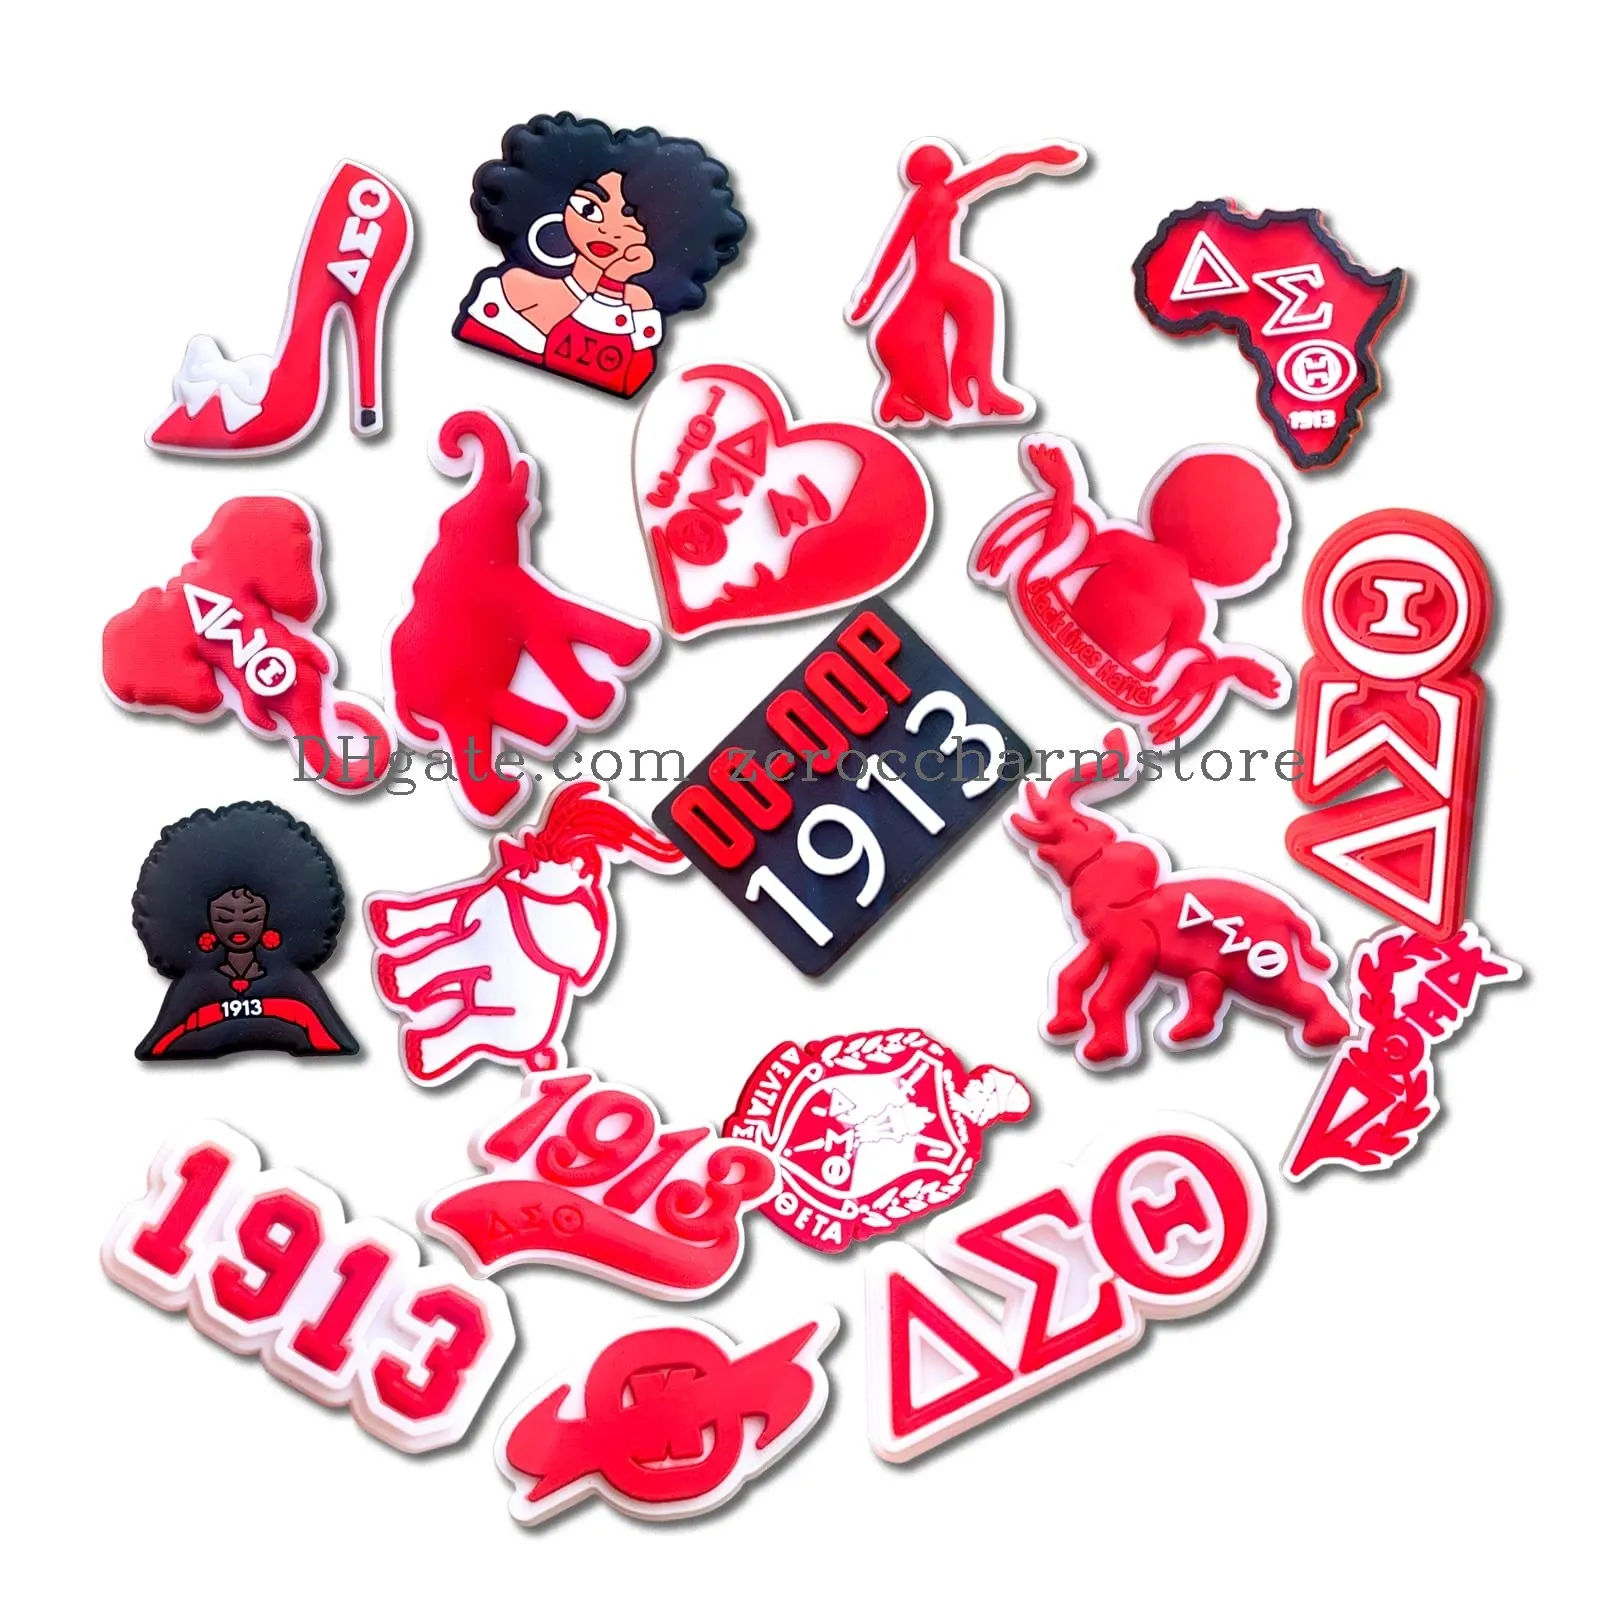 aka zeta phi beta shoe charms for clog decoration delta sigma theta sorority charms accessories for girls women party favor 19